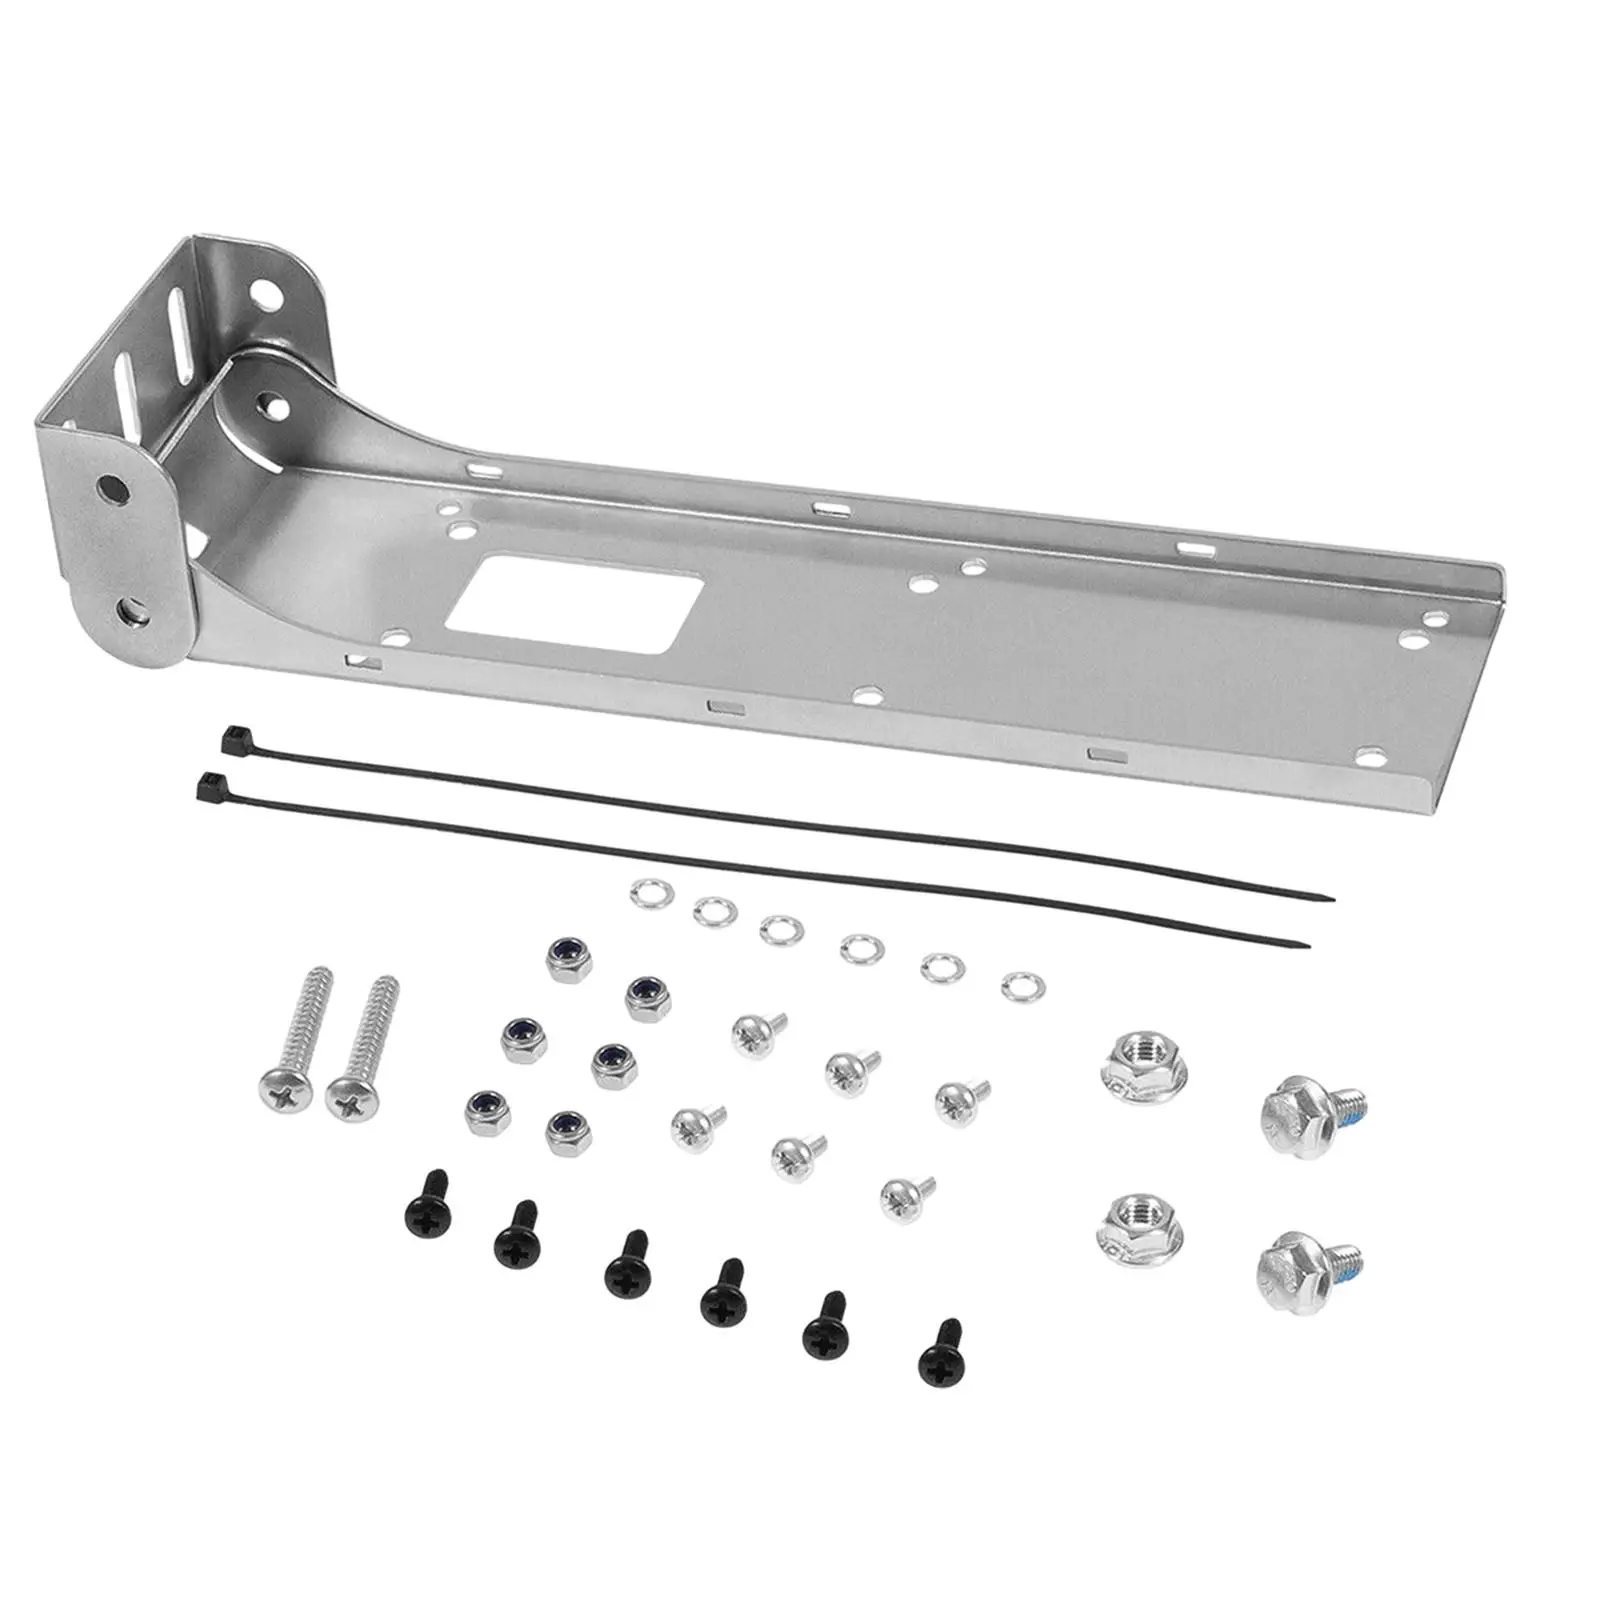 000-12603-001 Durable Replaces Spare Parts High Performance Premium Transom Mount Bracket Stainless Steel for StructureScan